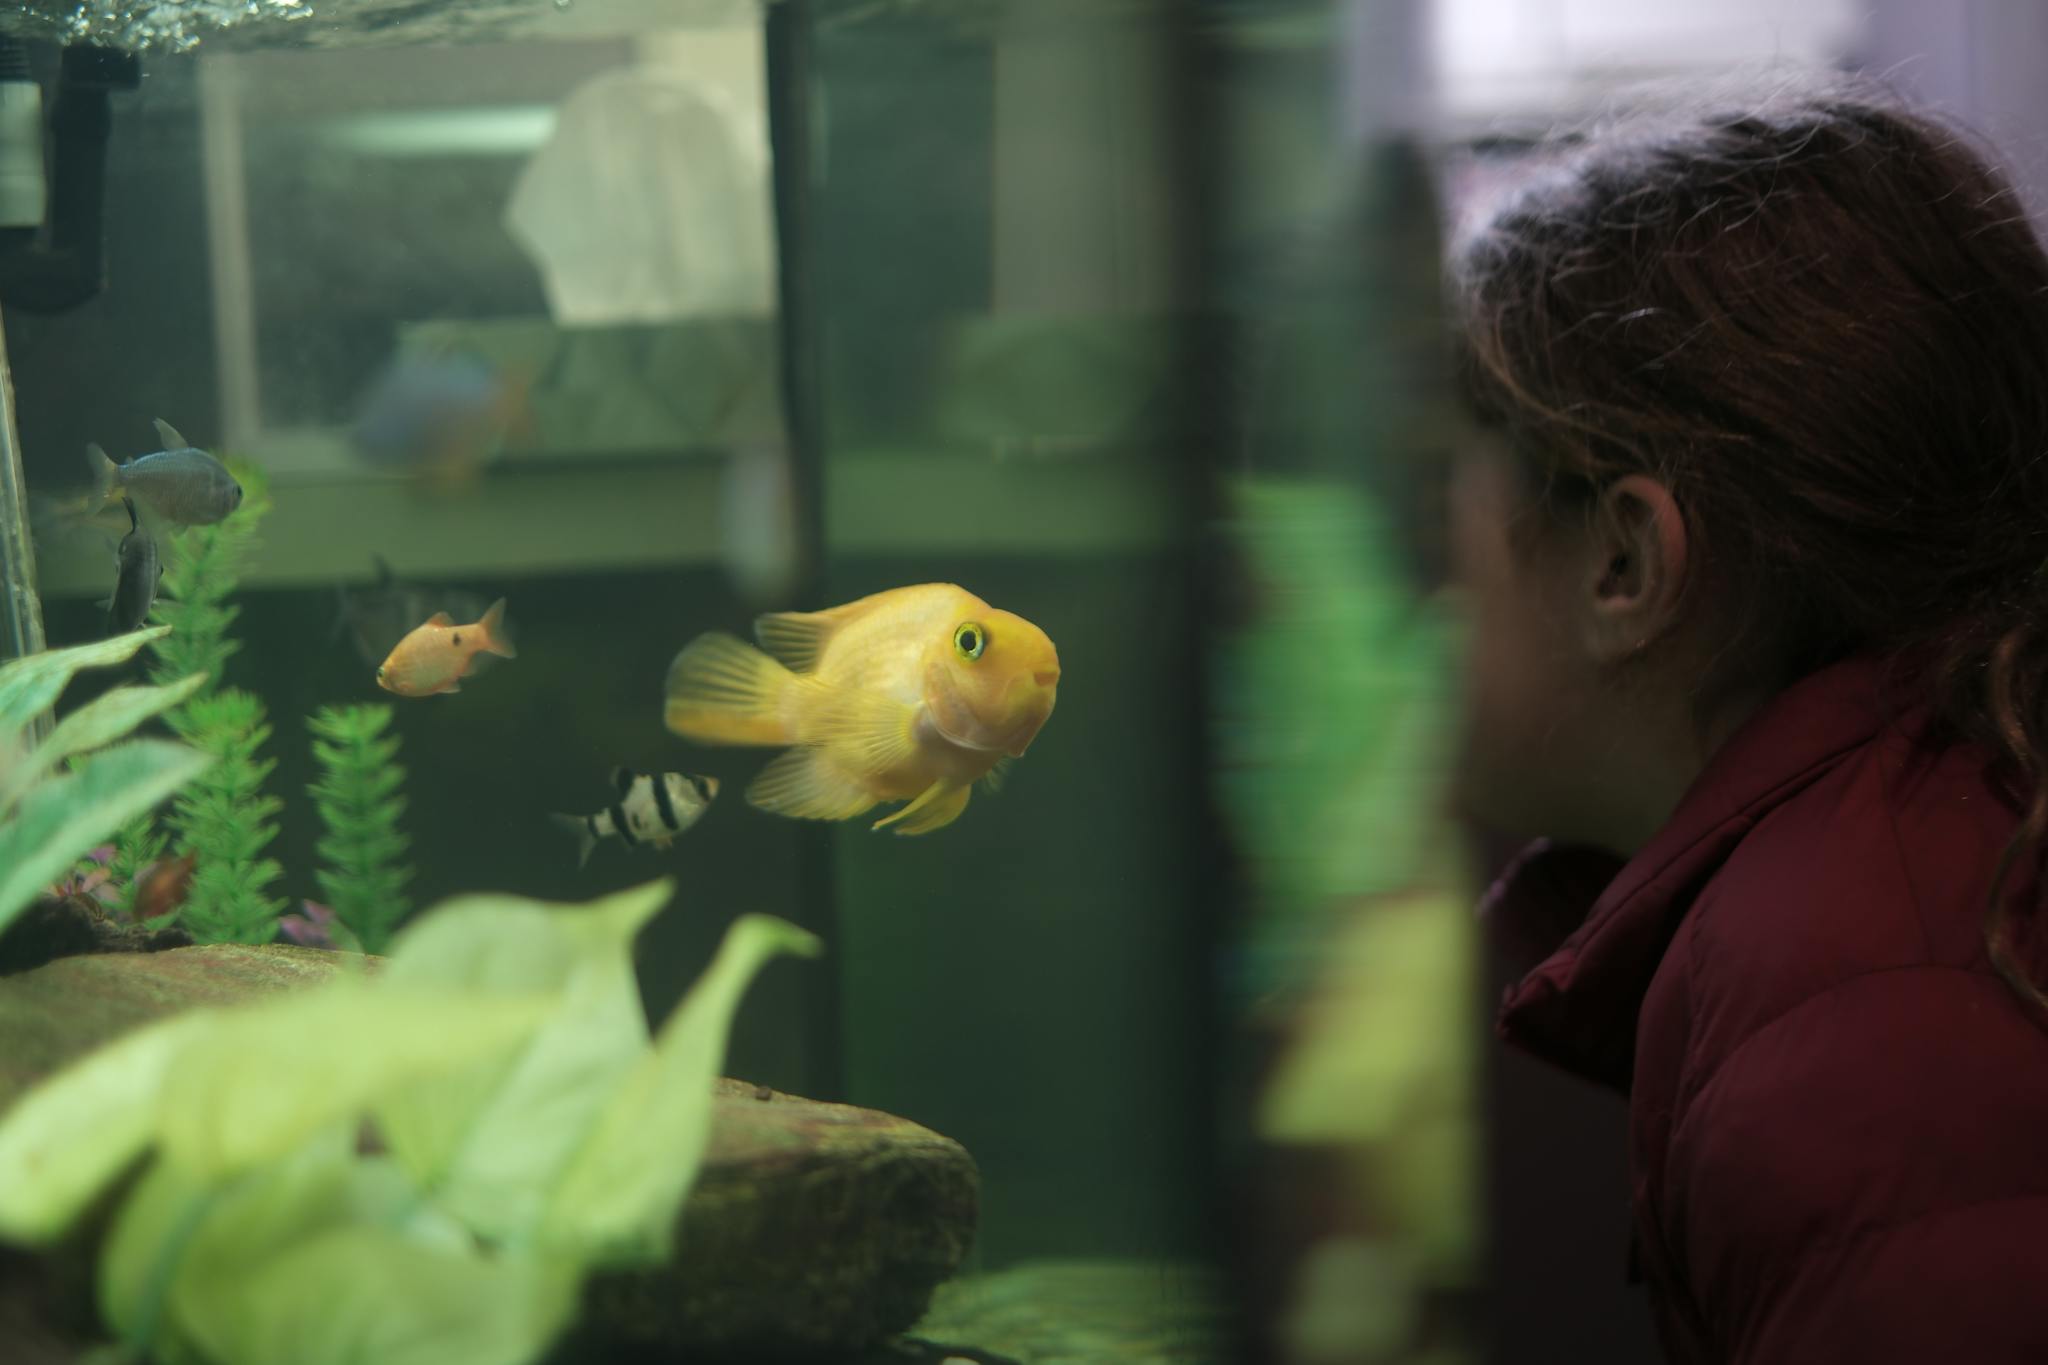 A person in a red jacket observing fish in an aquarium